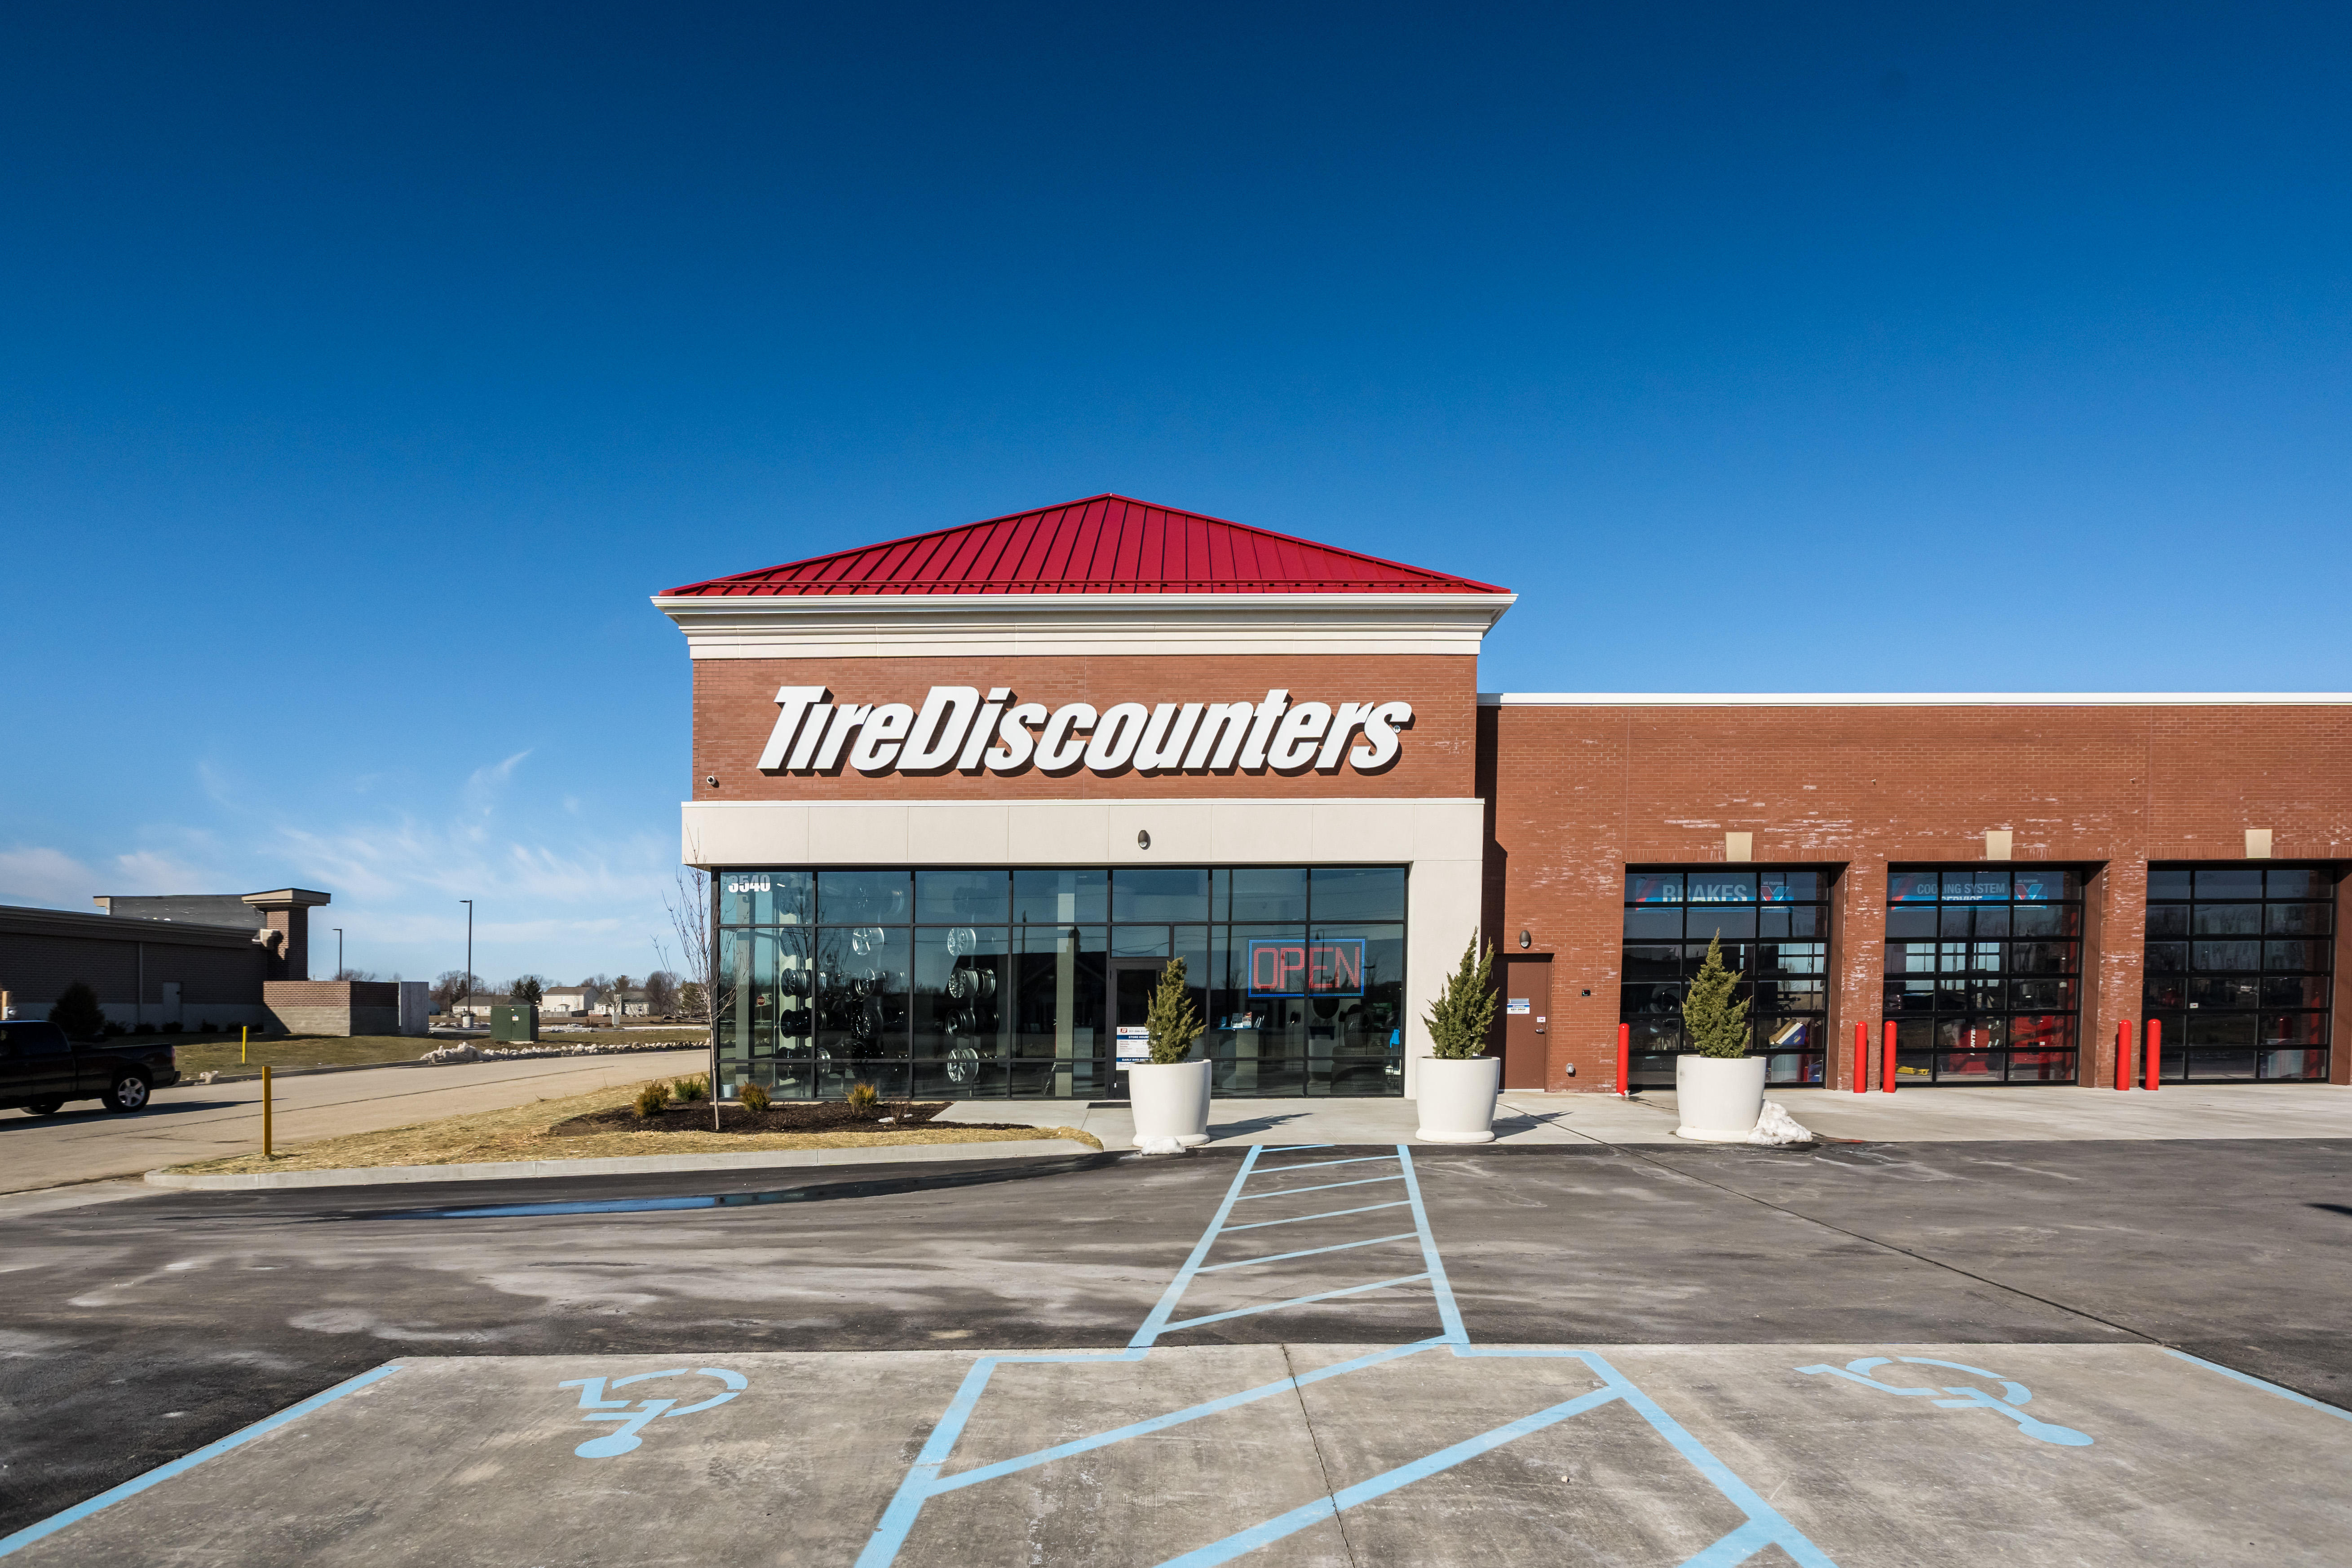 Tire Discounters on 3540 E. State Road 32 in Westfield